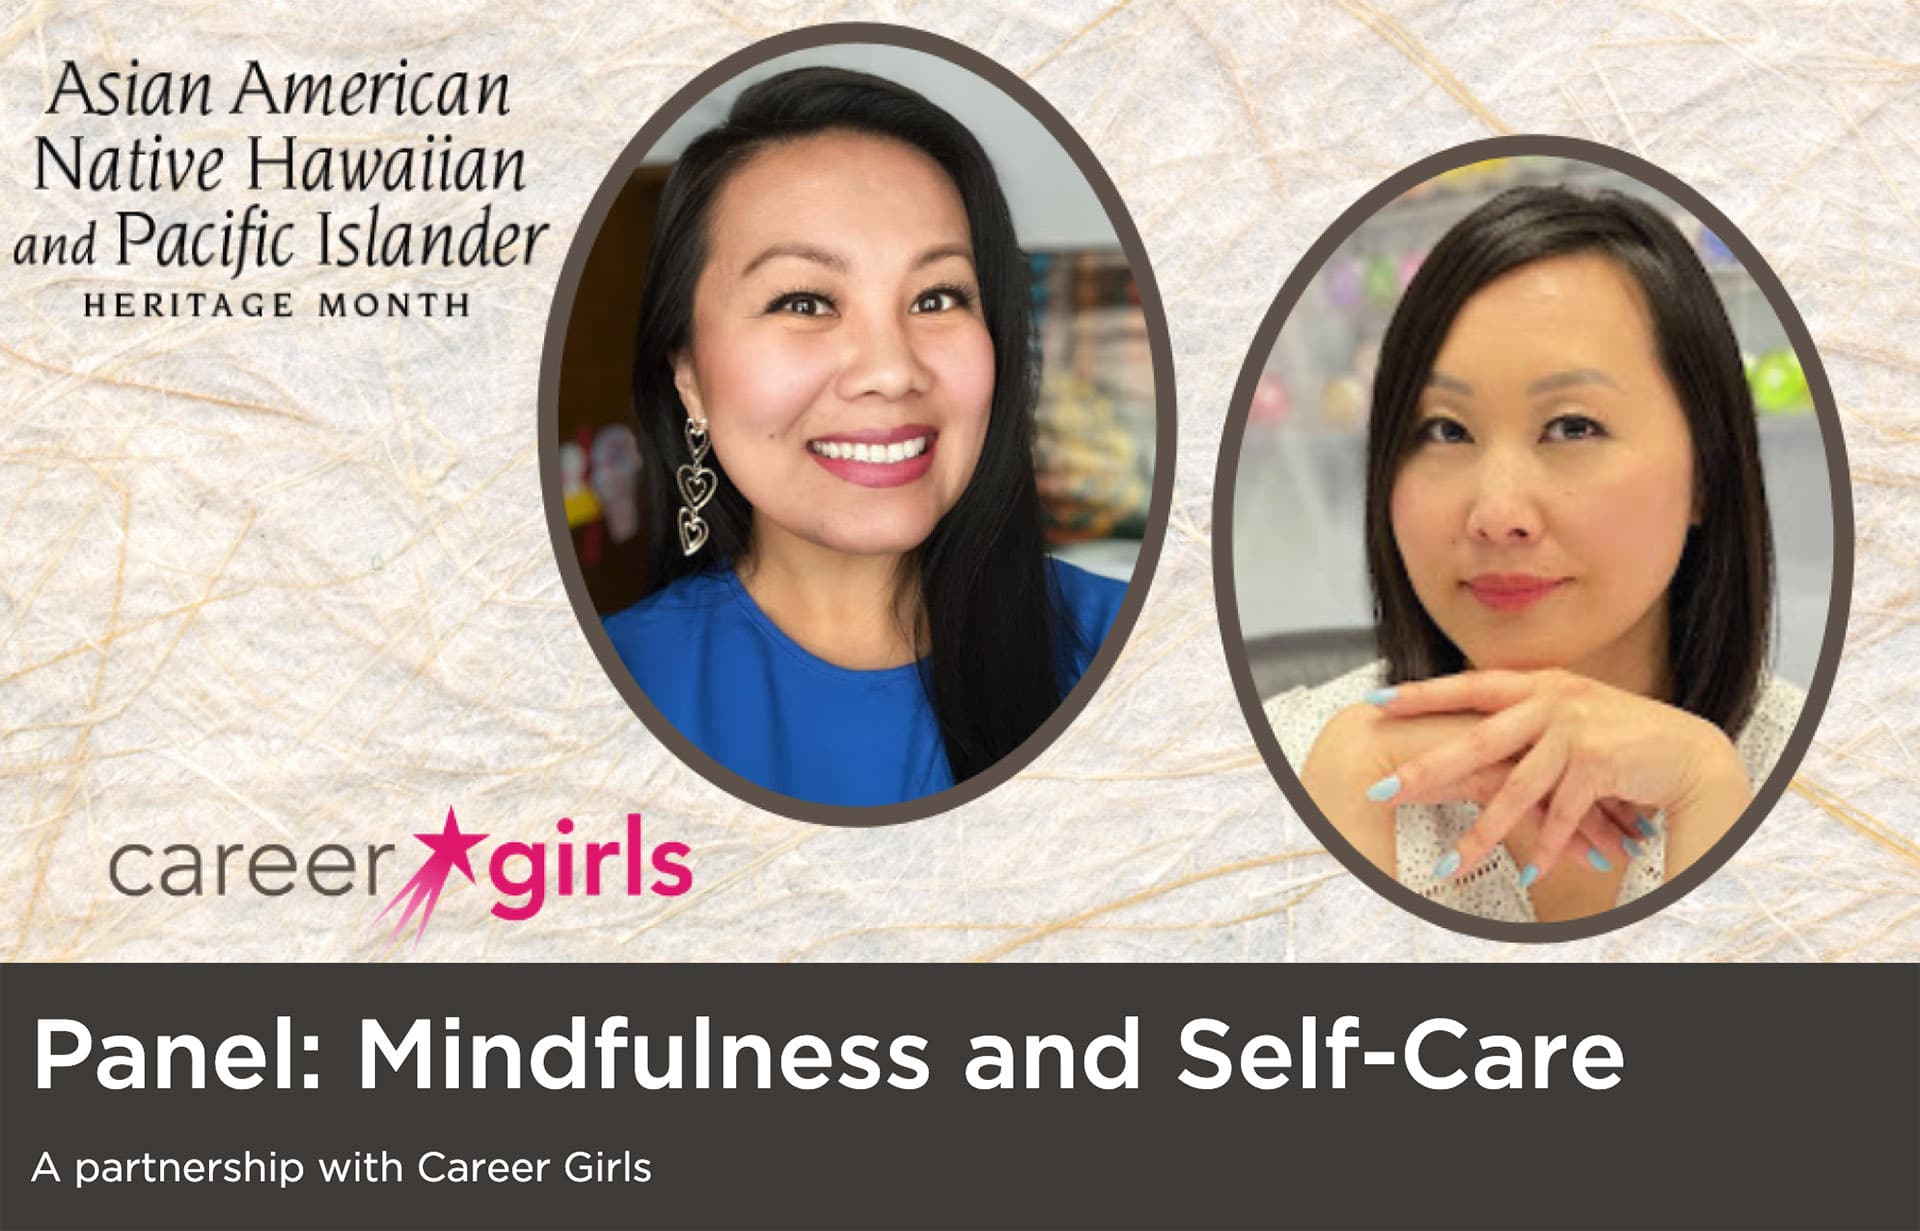 Career Girls San Francisco Public Library Mindfulness and Self-care program